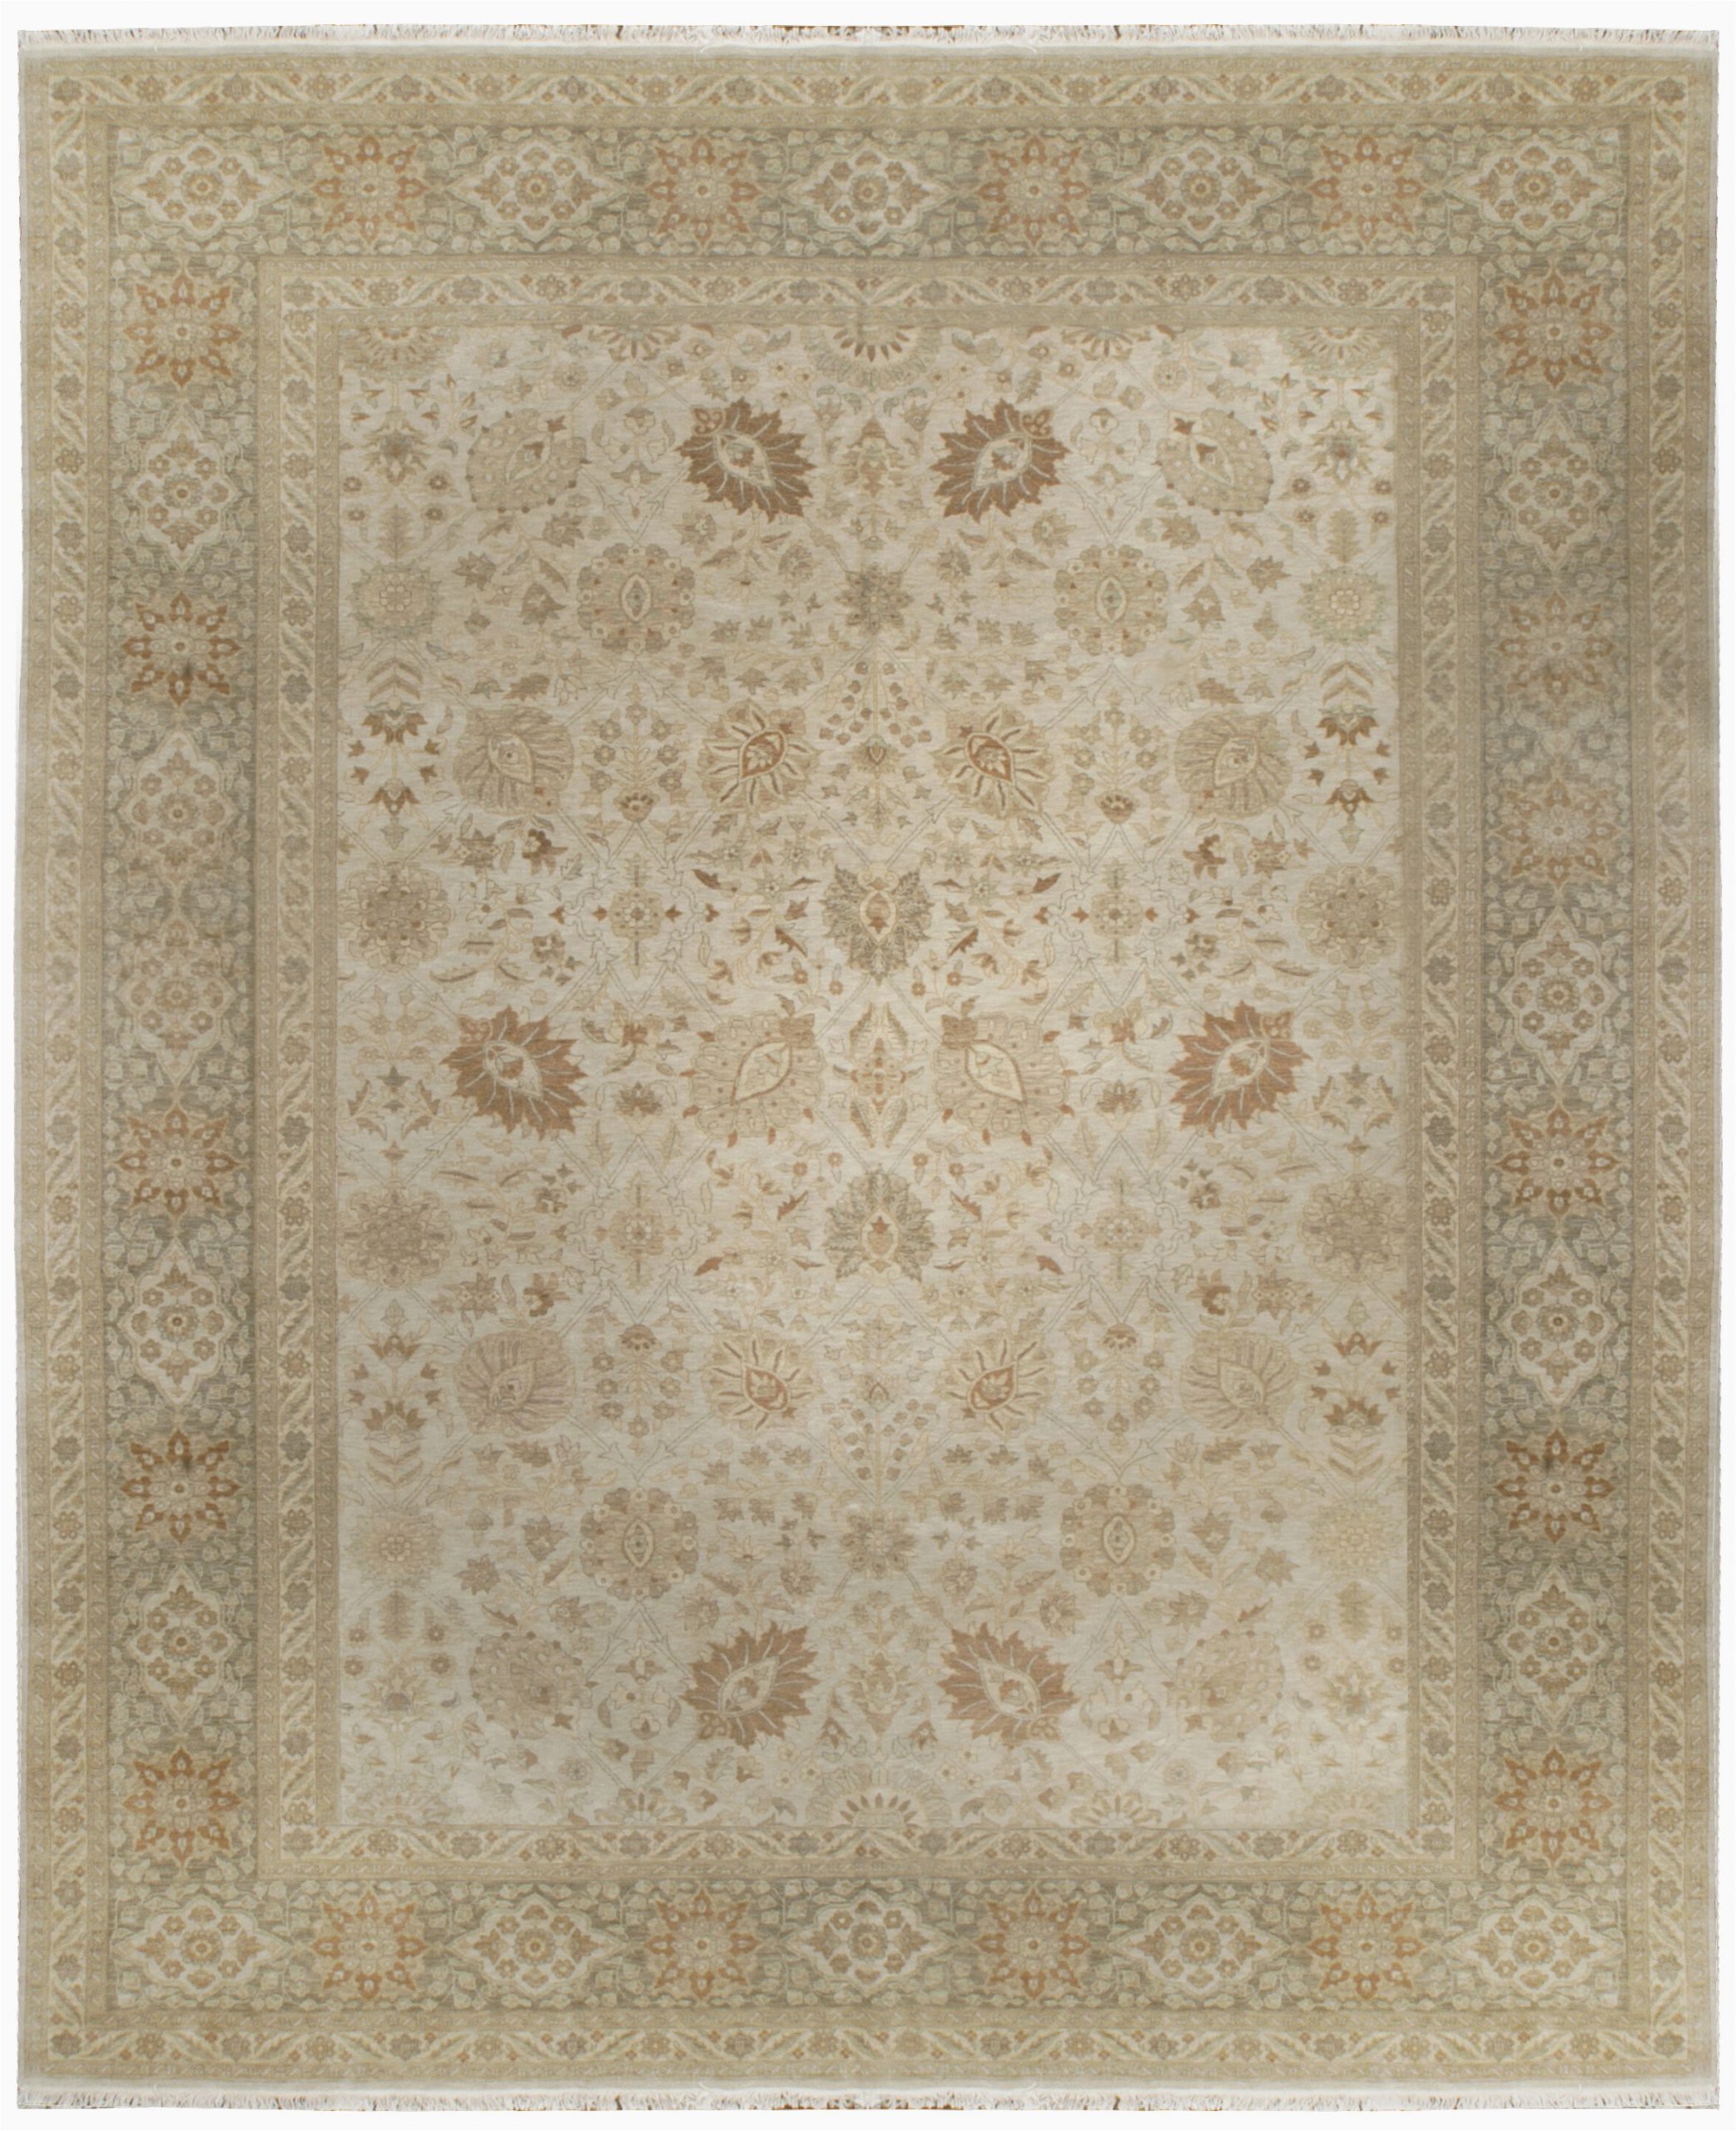 oakrugs by chelsea one of a kind hand knotted beige 12 x 146 wool area rug okrz1439